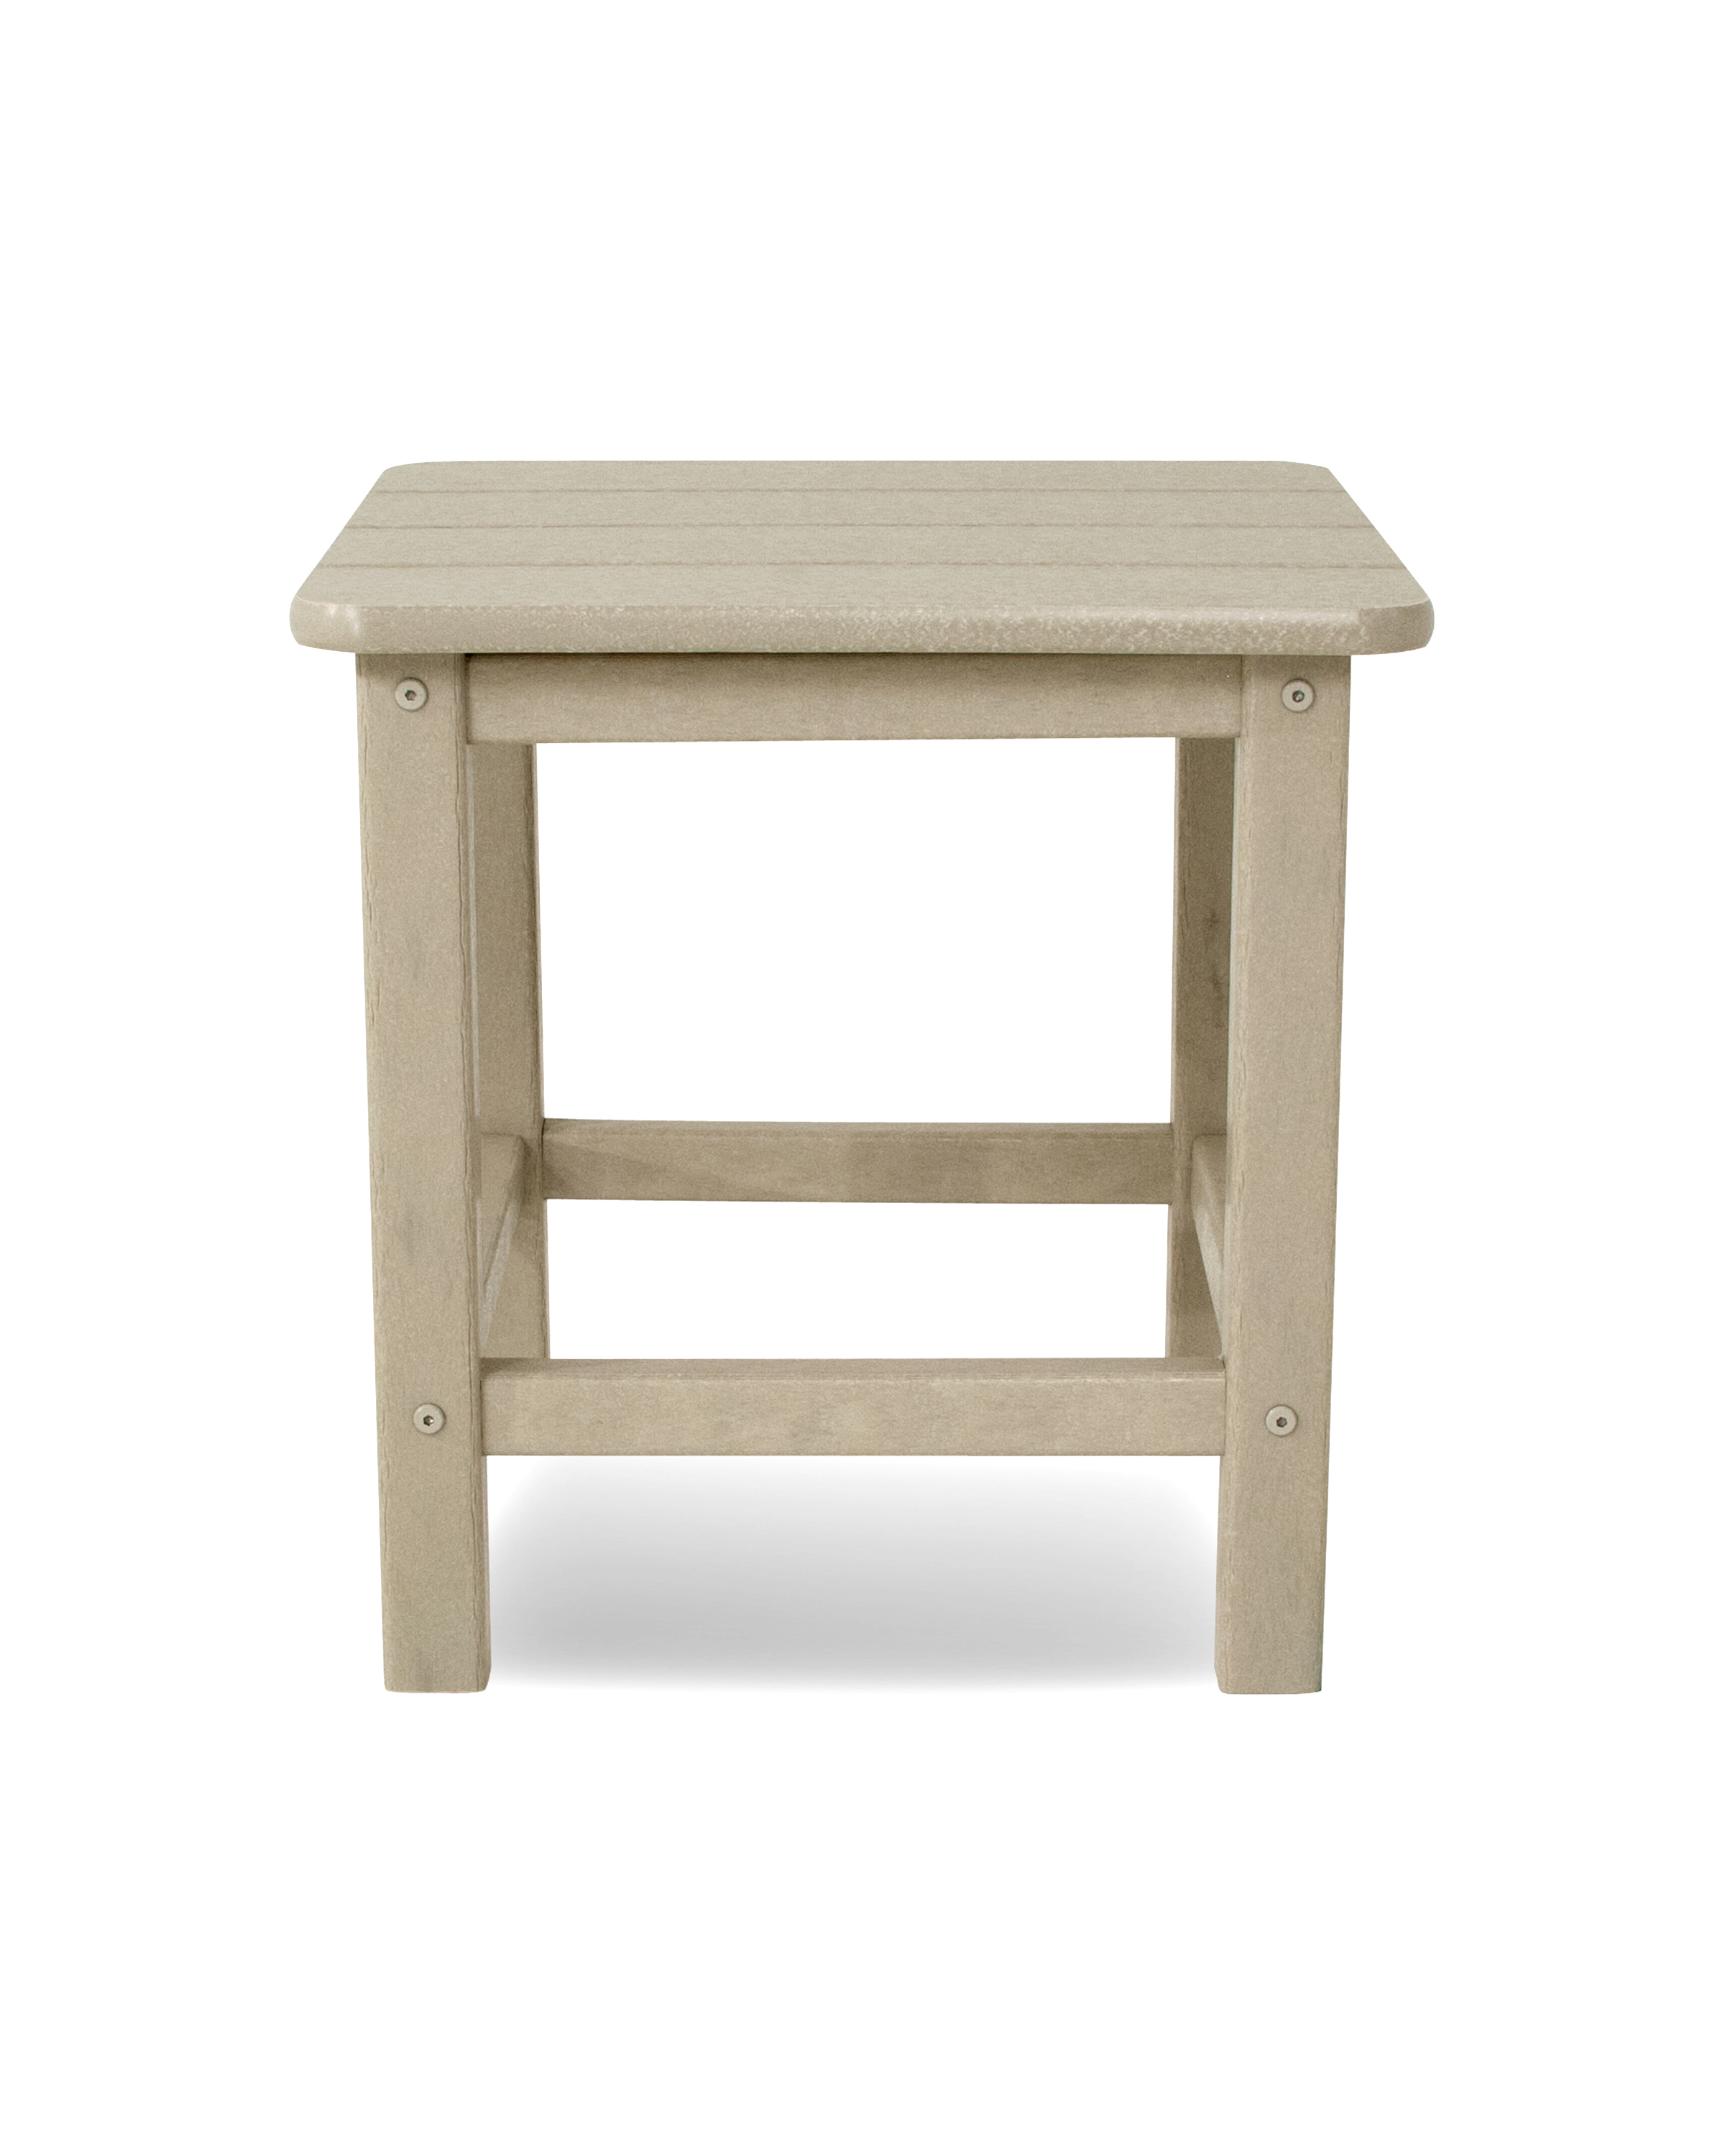 This Side Table Is The Perfect Accent Piece For All Of The Chairs In The Seashell Collection. Polywood Furniture Is Constructed Of Solid Polywood Lumber That